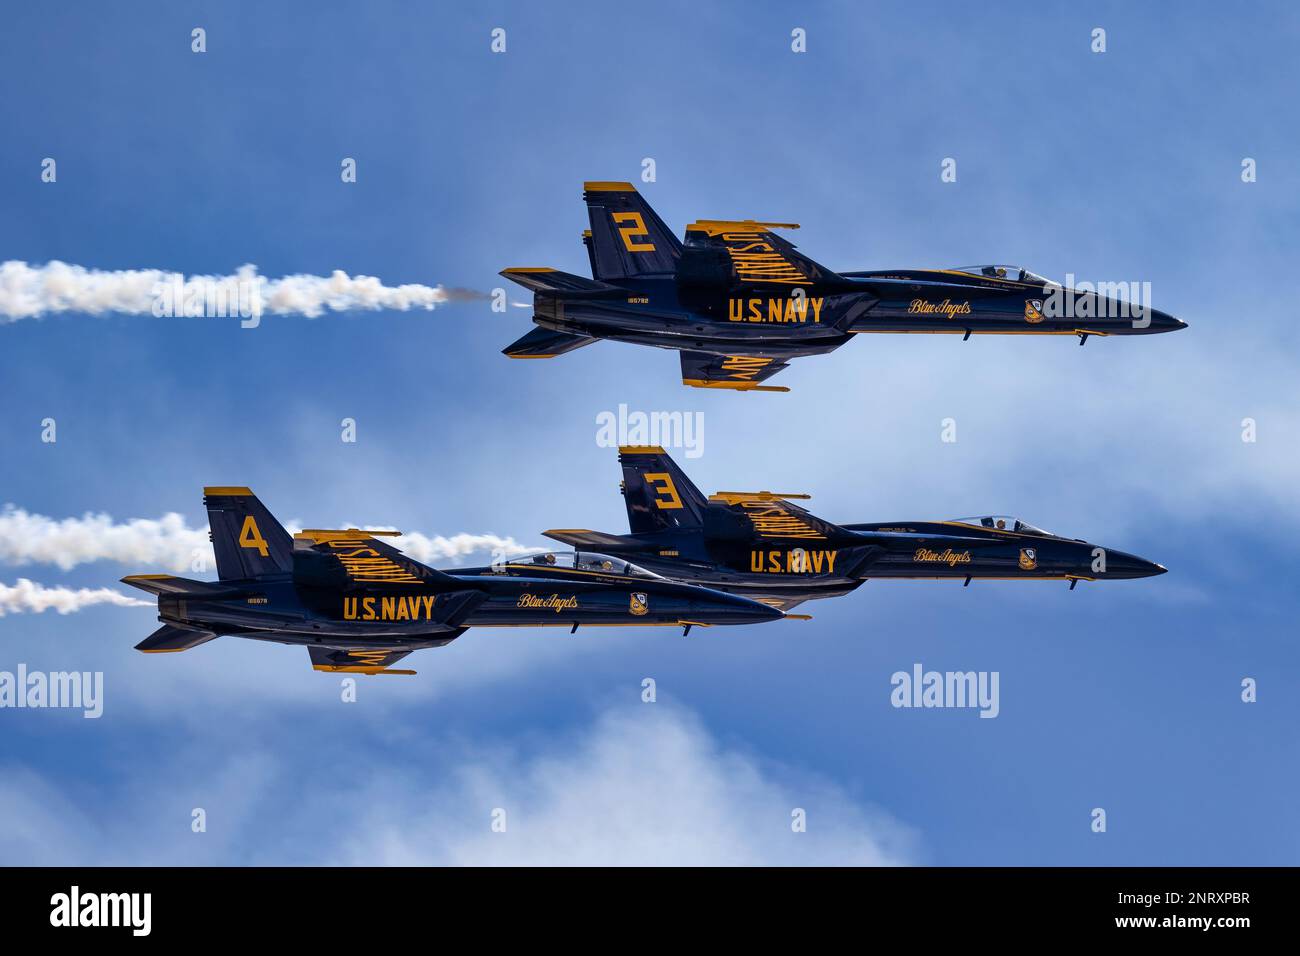 The US Navy Blue Angels perform at the 2022 Miramar Airshow in San